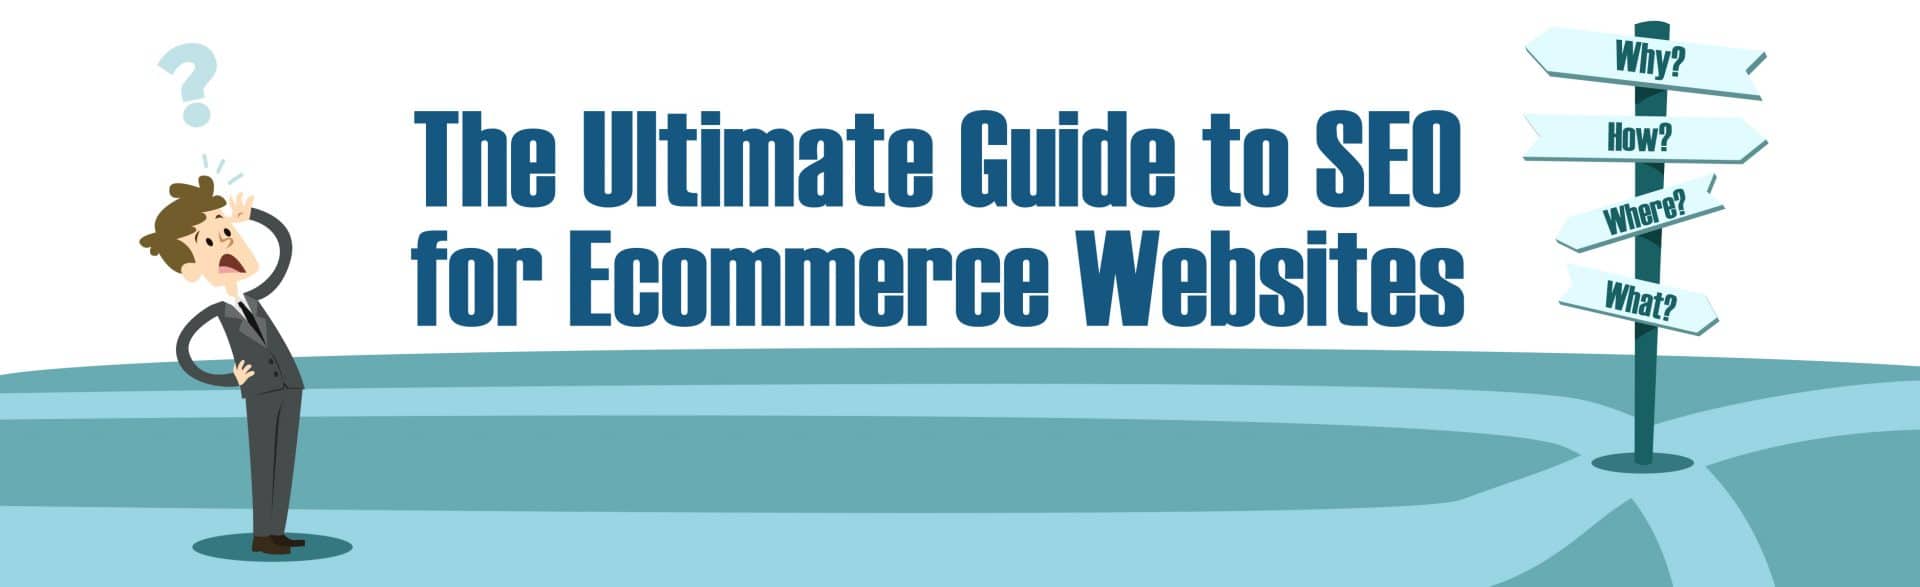 The Ultimate Guide to SEO for Ecommerce Websites